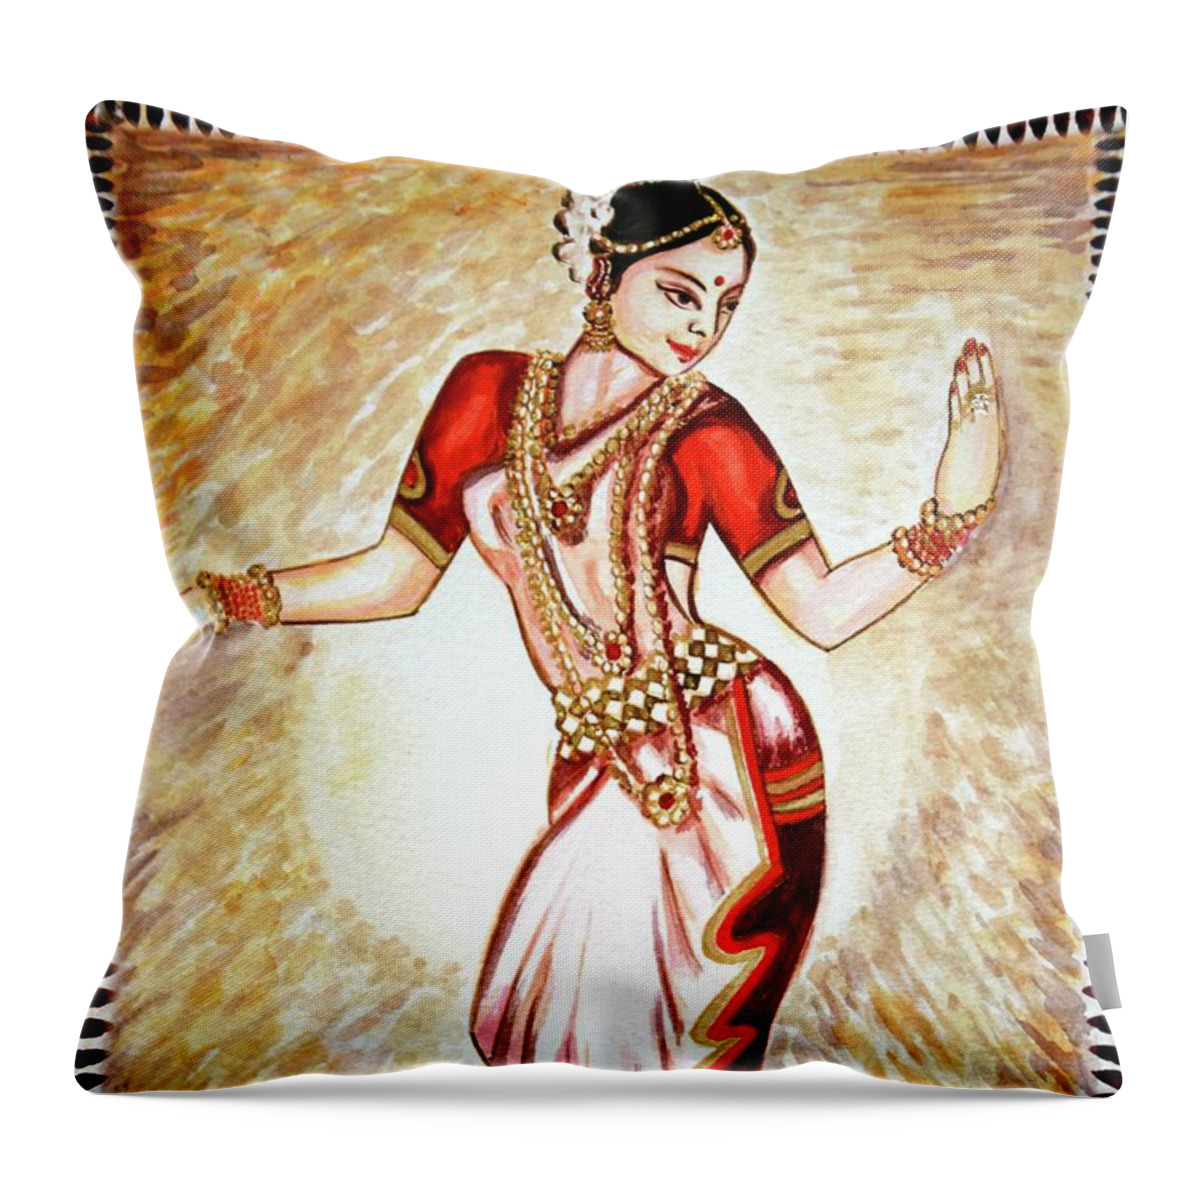 Dance Throw Pillow featuring the painting Dancer 1 by Harsh Malik